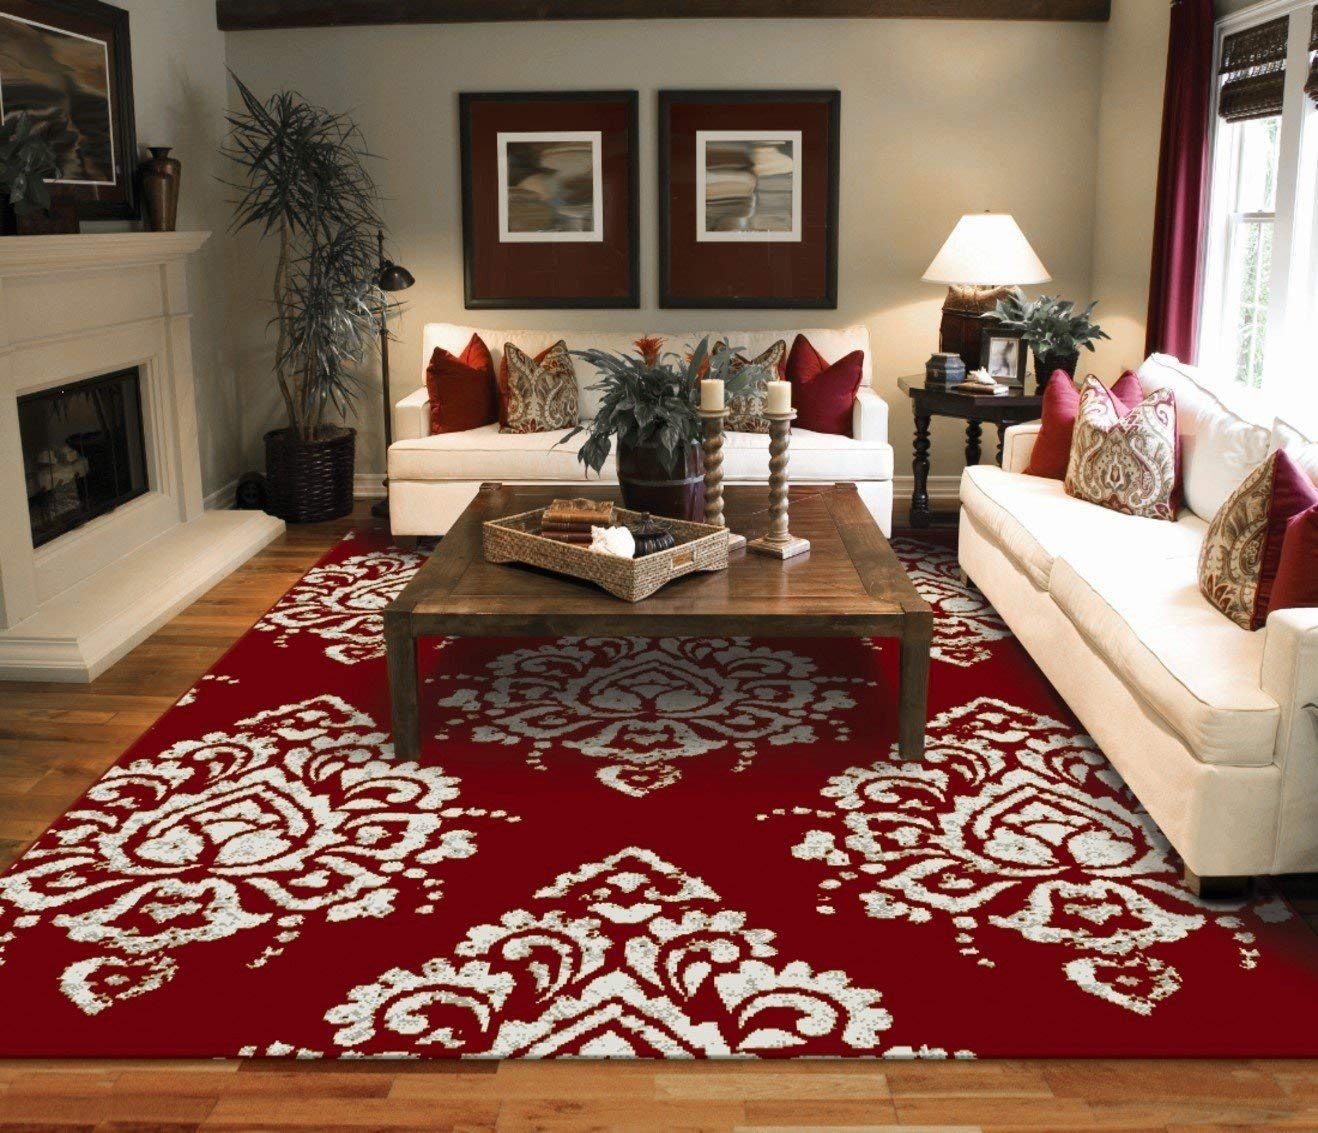 Red rugs amazon.com: new modern rugs for living room red u0026 cream flower rugs leaves LBWVRWC